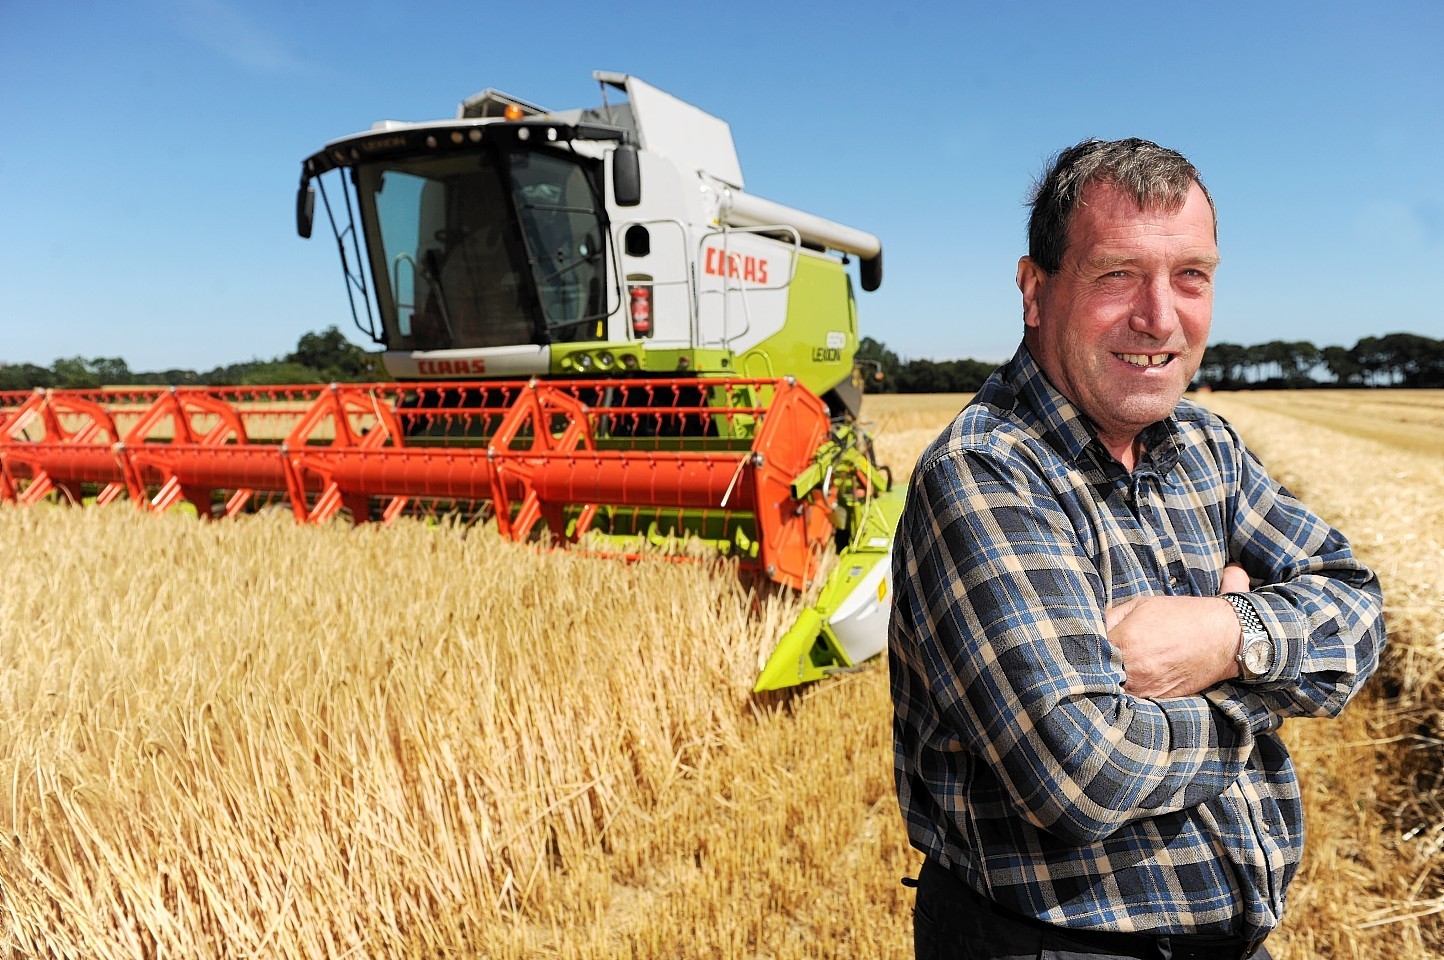 Tain farmer Jim Whiteford started cutting winter barley on Thursday July 18